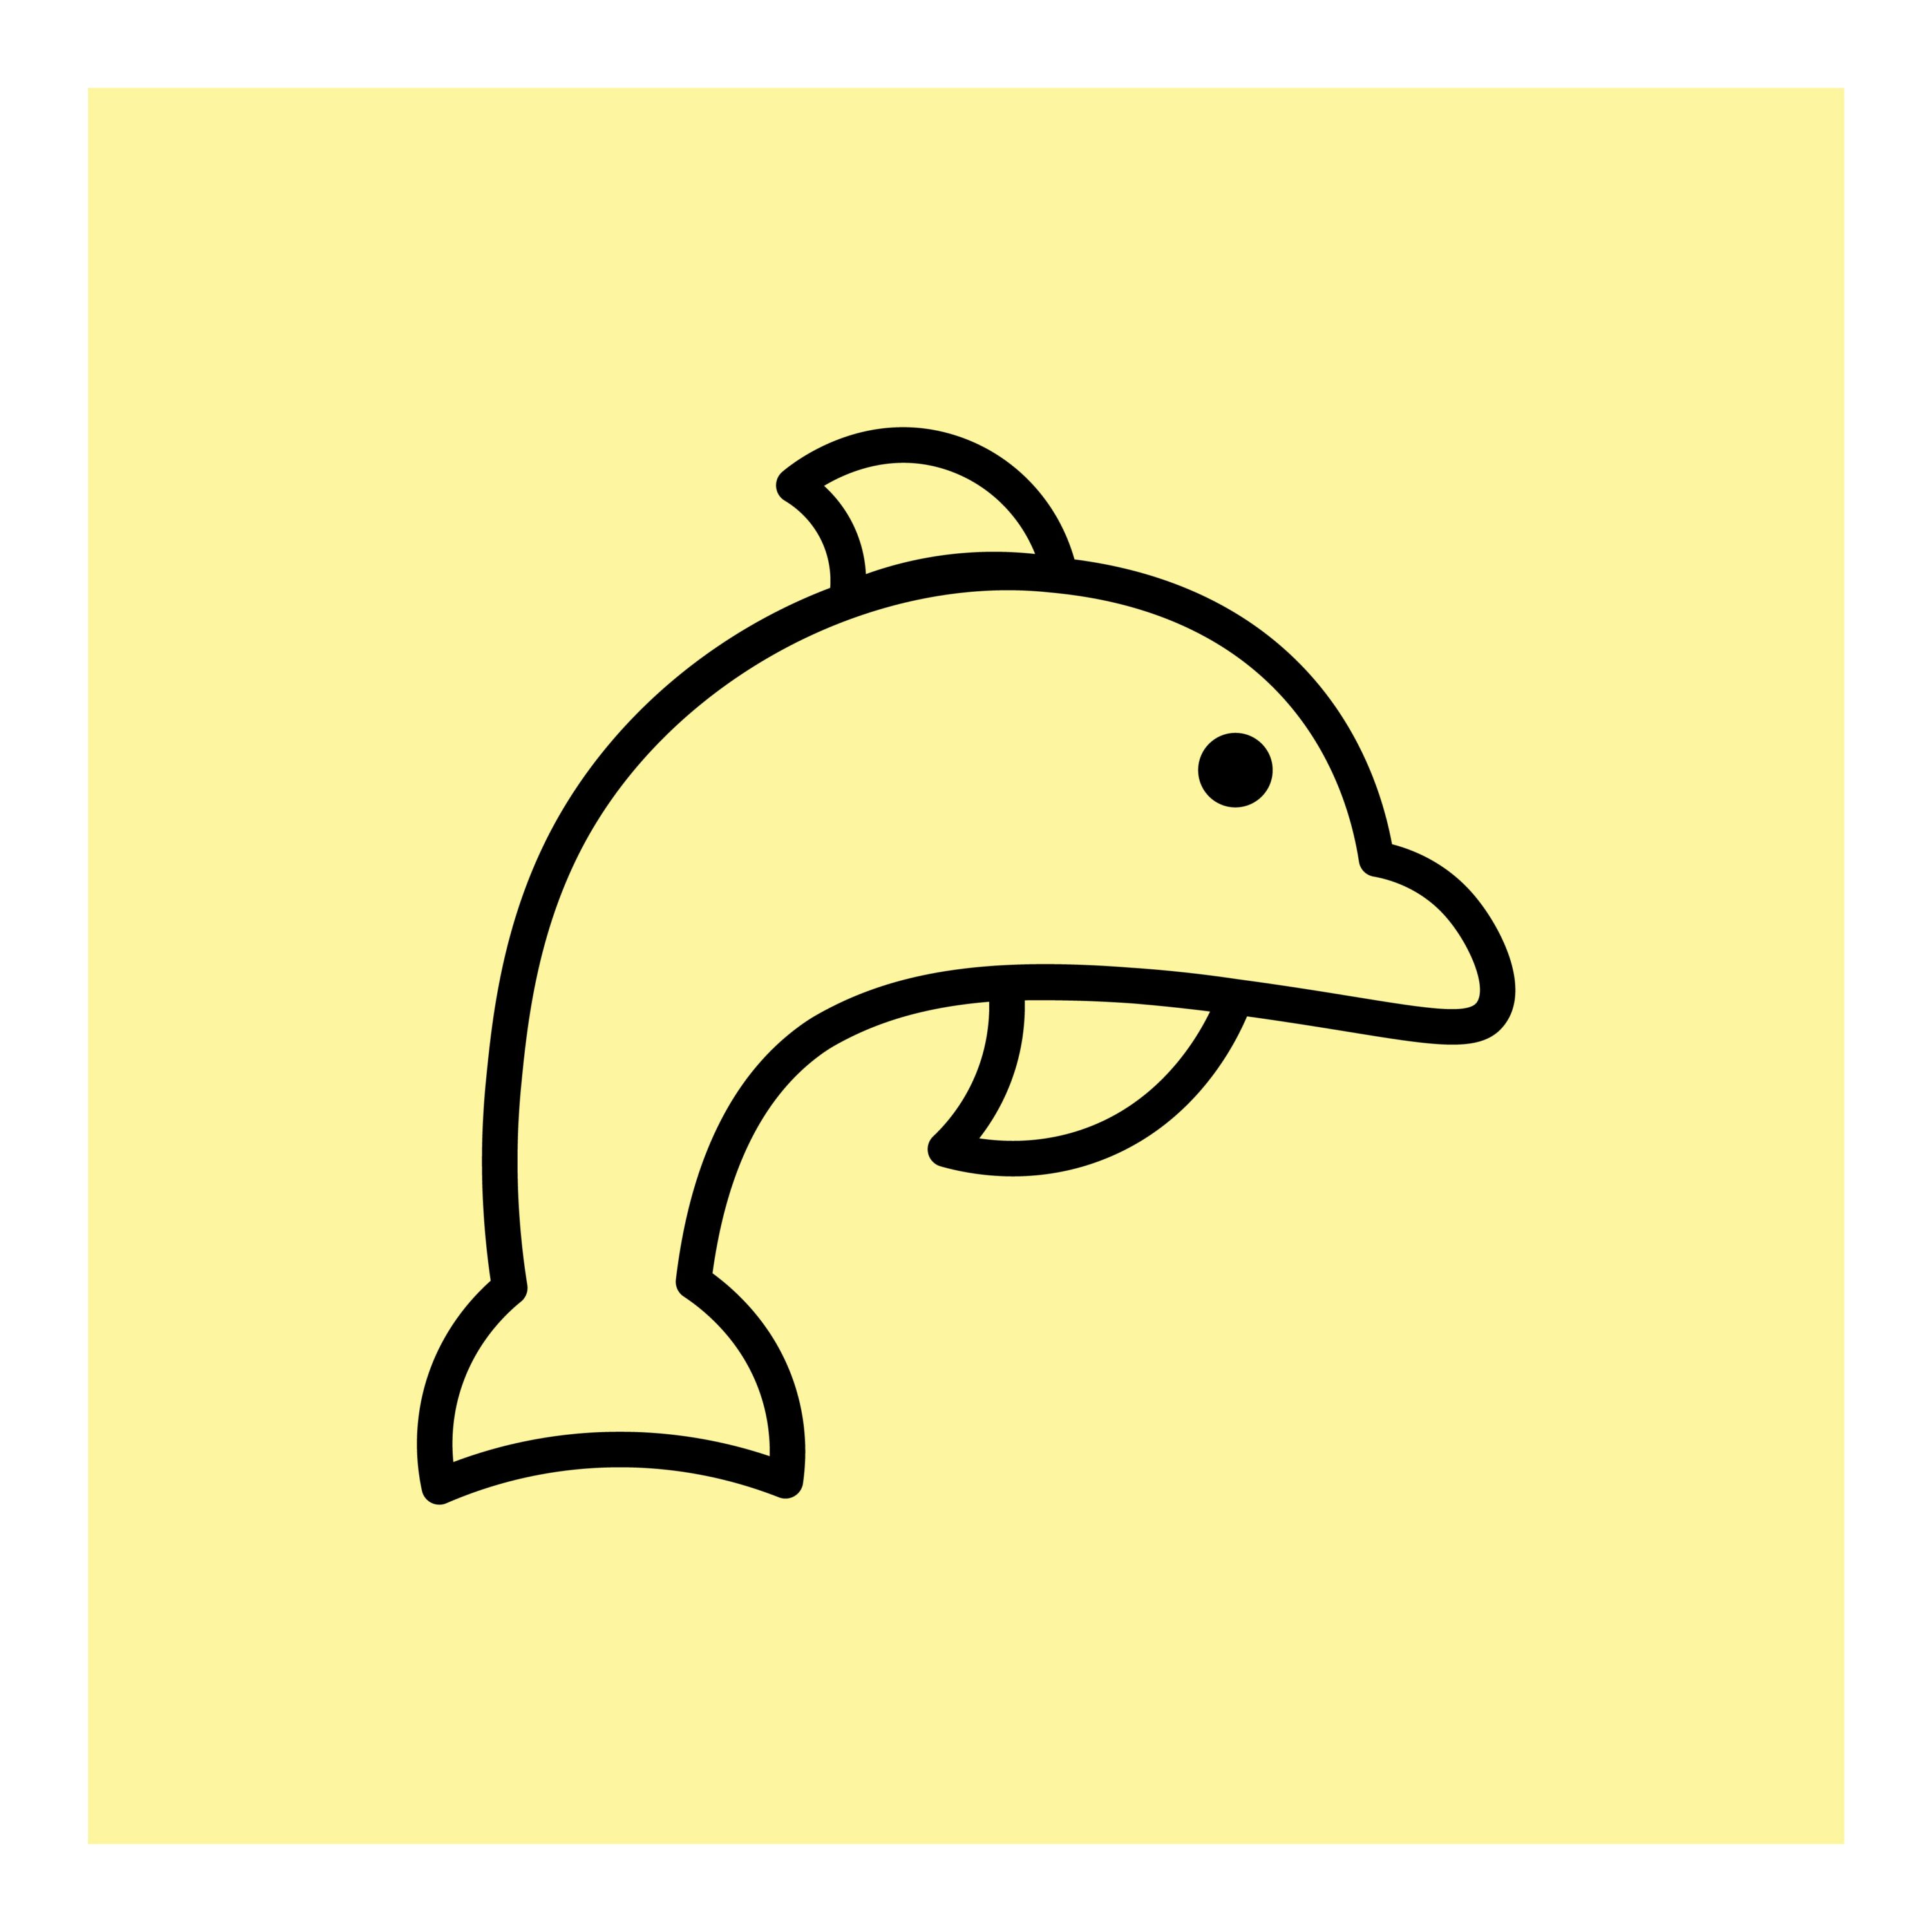 Illustration icon vector graphic of 4 marine biota icon outline style fish, dolphin, turtle, and squid.